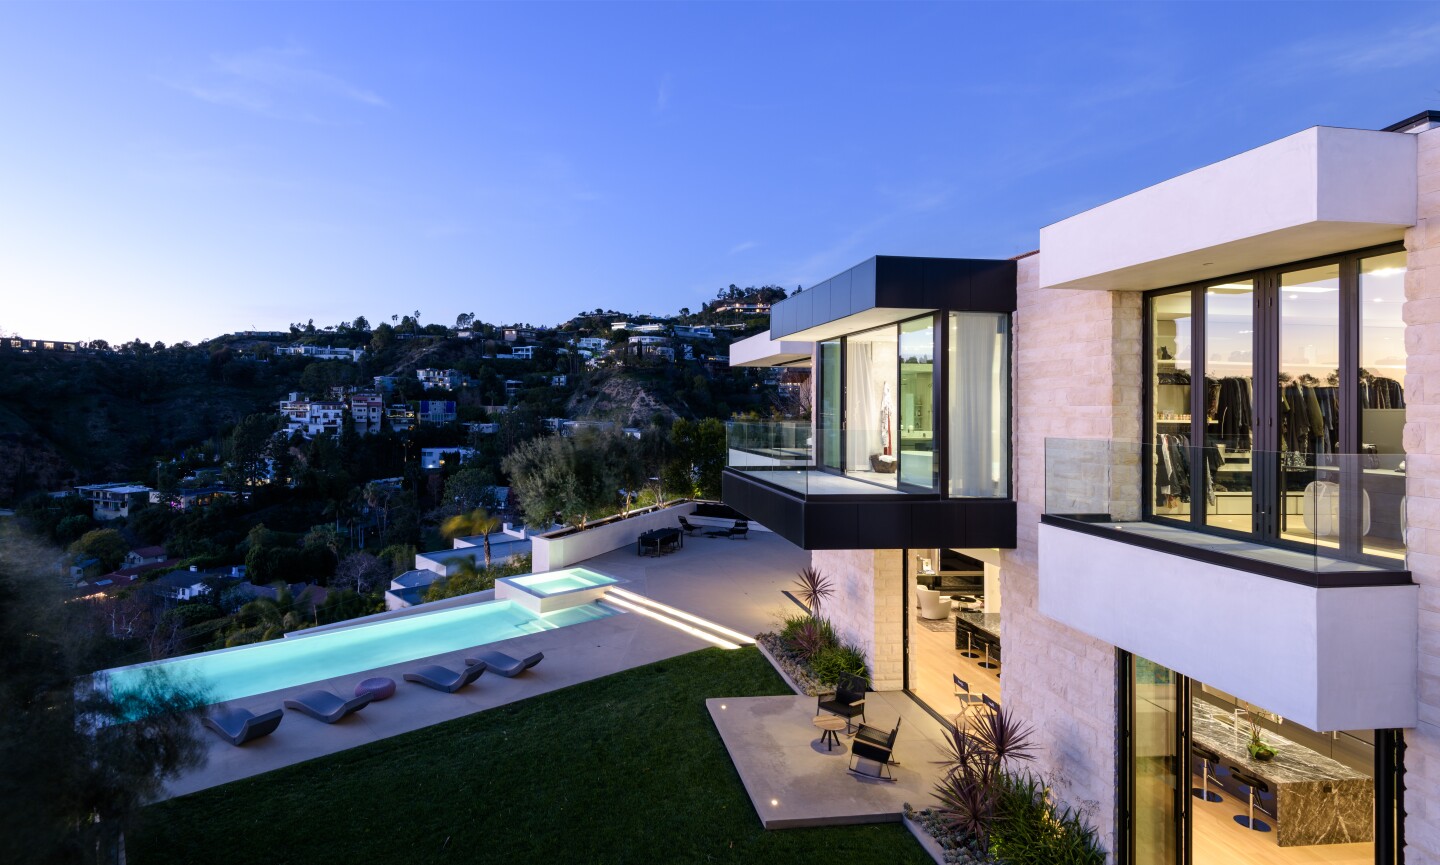 Russell Weiner paid $16.5 million for this L.A. home 2 weeks ago. He's ...